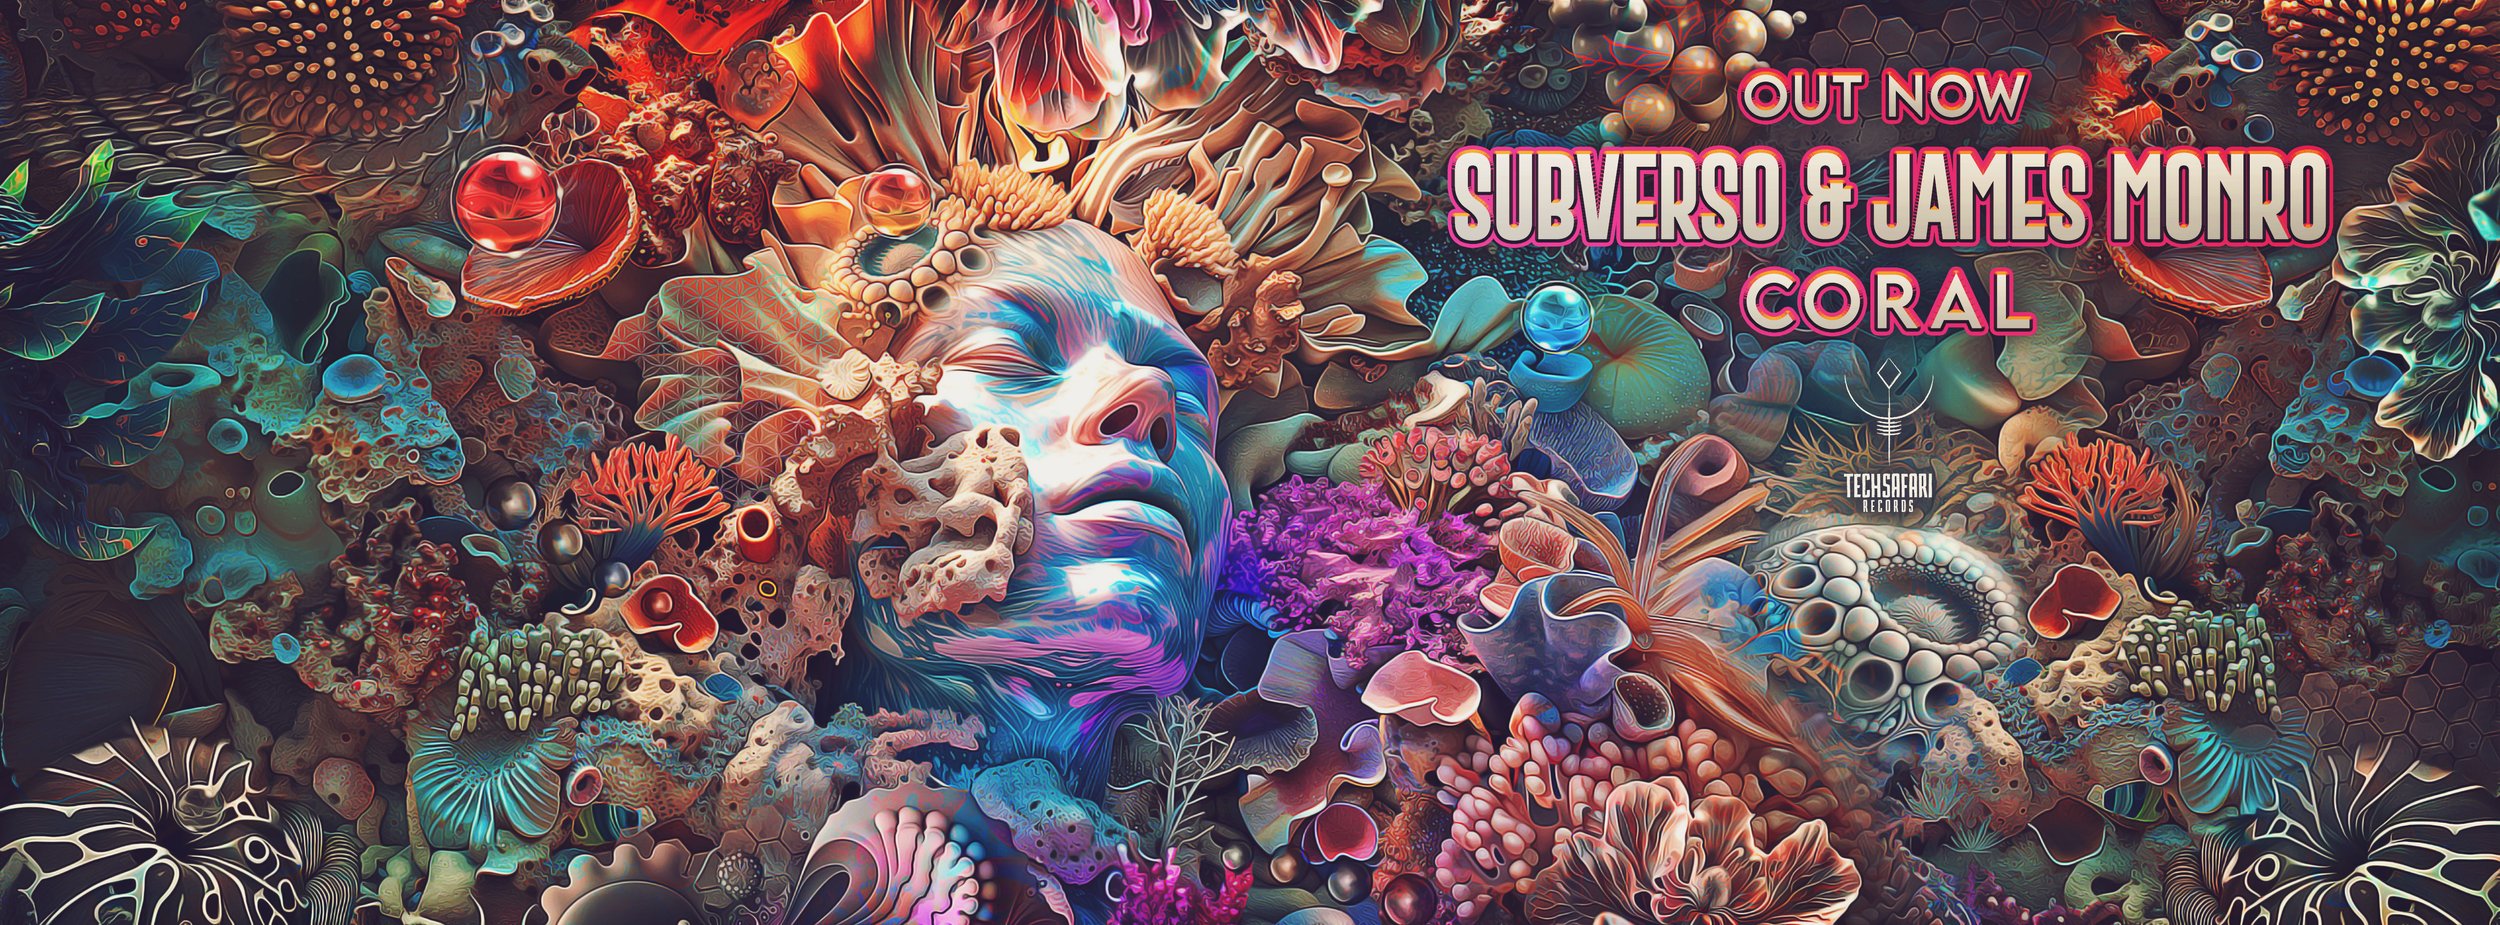 Subverso-&-James-Monro---Coral-v2-banner-out-now.jpg